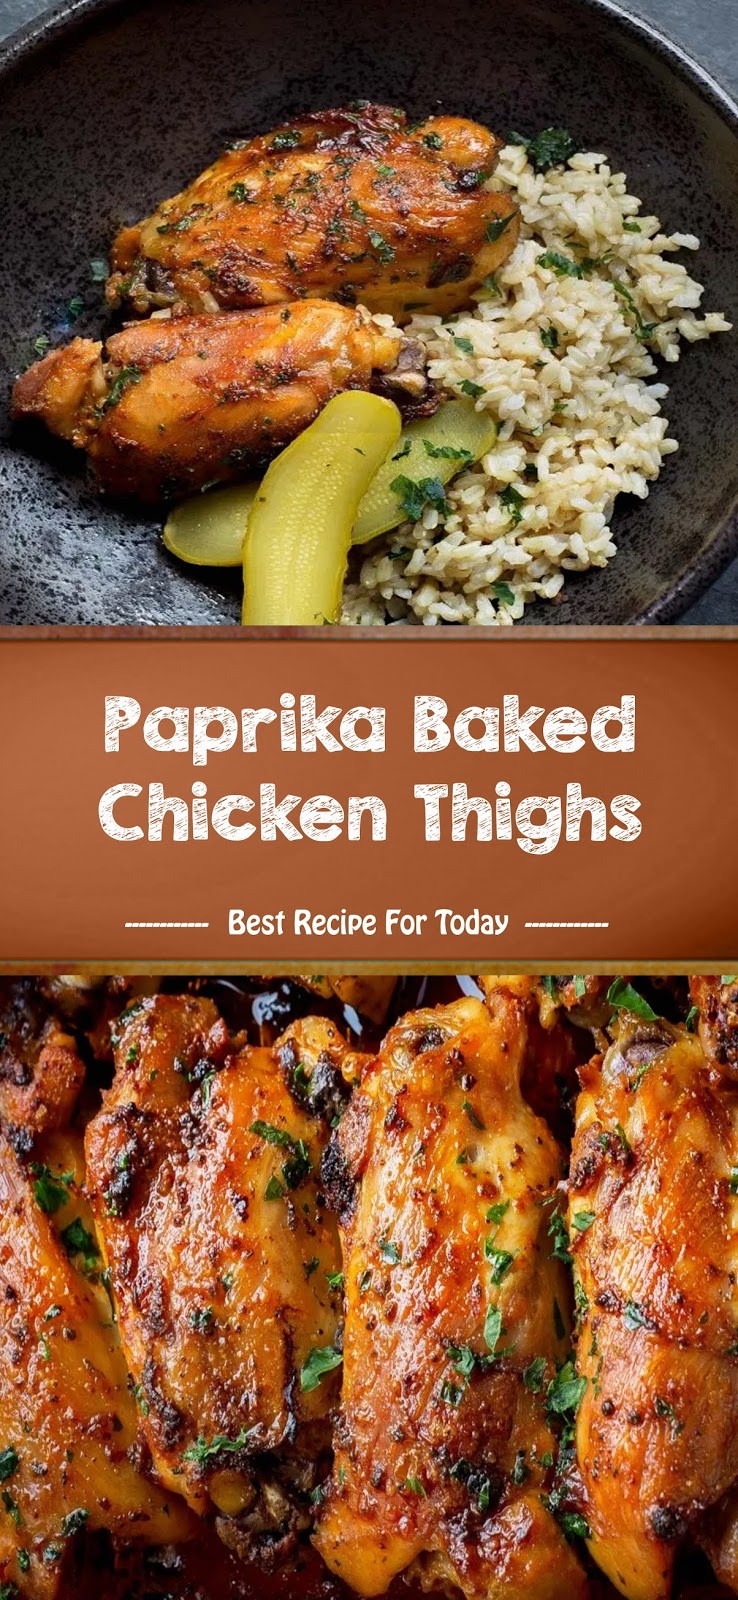 Paprika Chicken Thighs
 Paprika Baked Chicken Thighs Health Tips